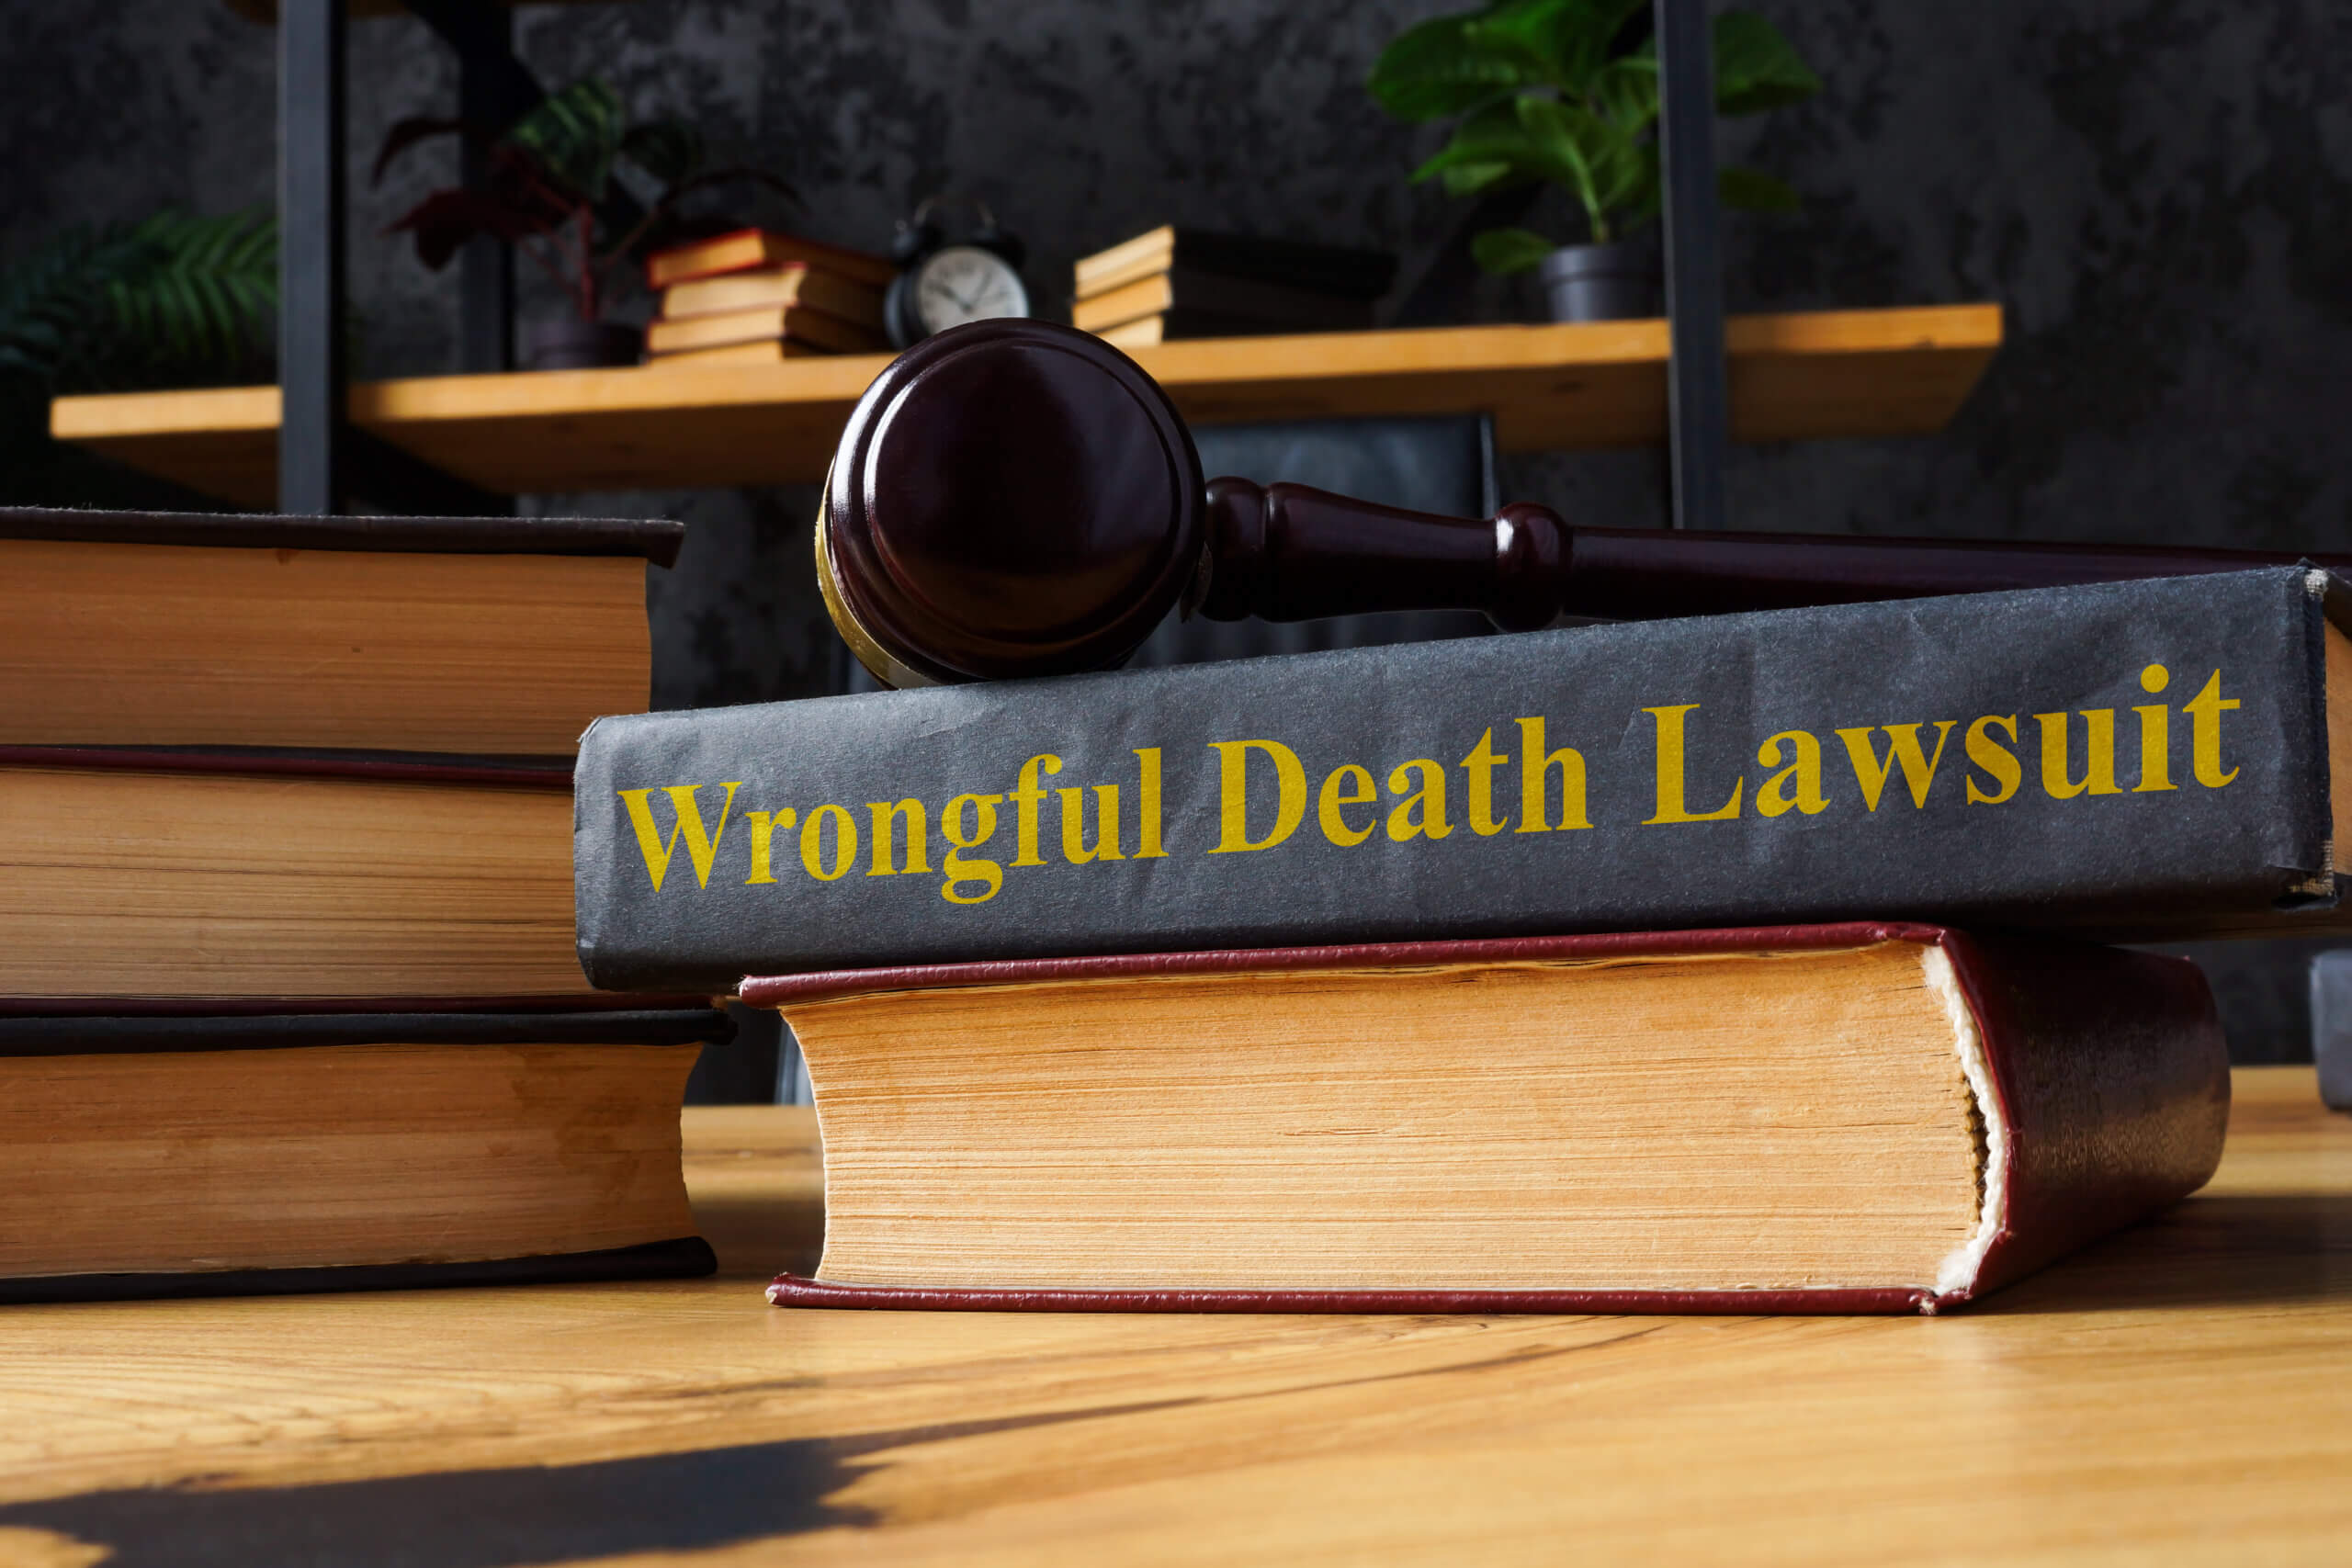 he statute of limitations for wrongful death in California